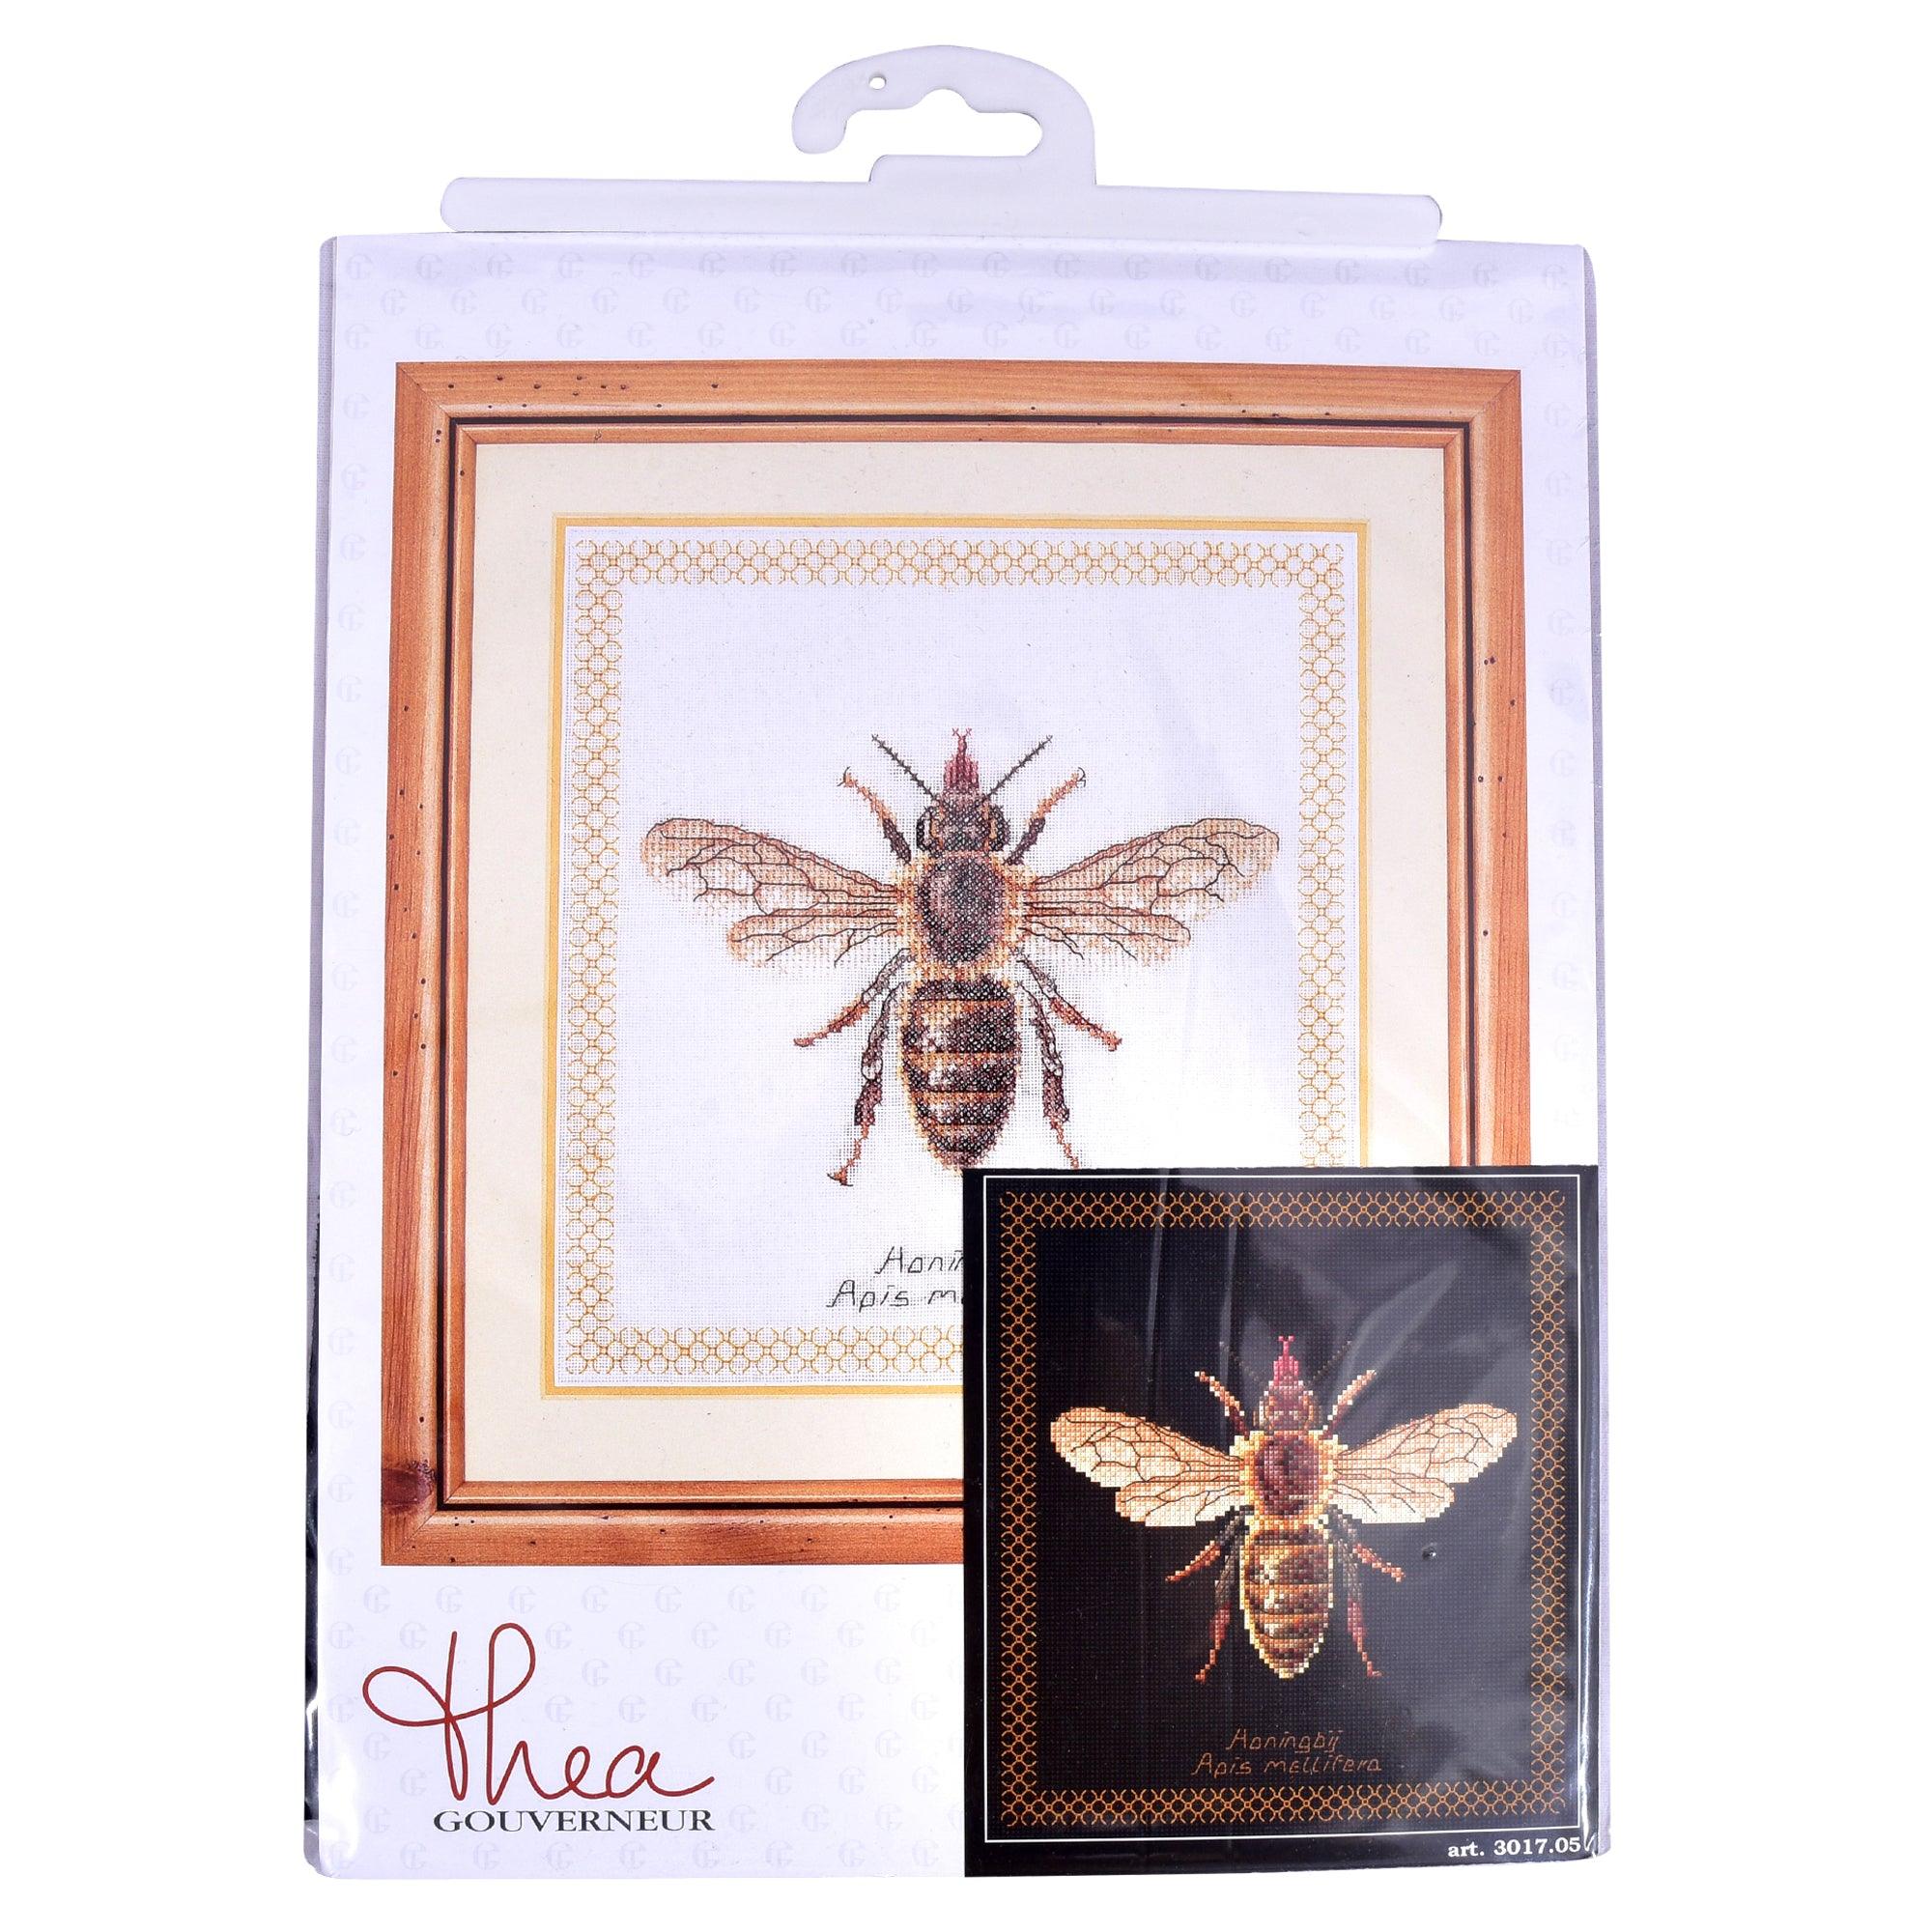 Thea Gouverneur - Counted Cross Stitch Kit - Honey Bee - Aida Black - 18 count - 3017.05 - Thea Gouverneur Since 1959